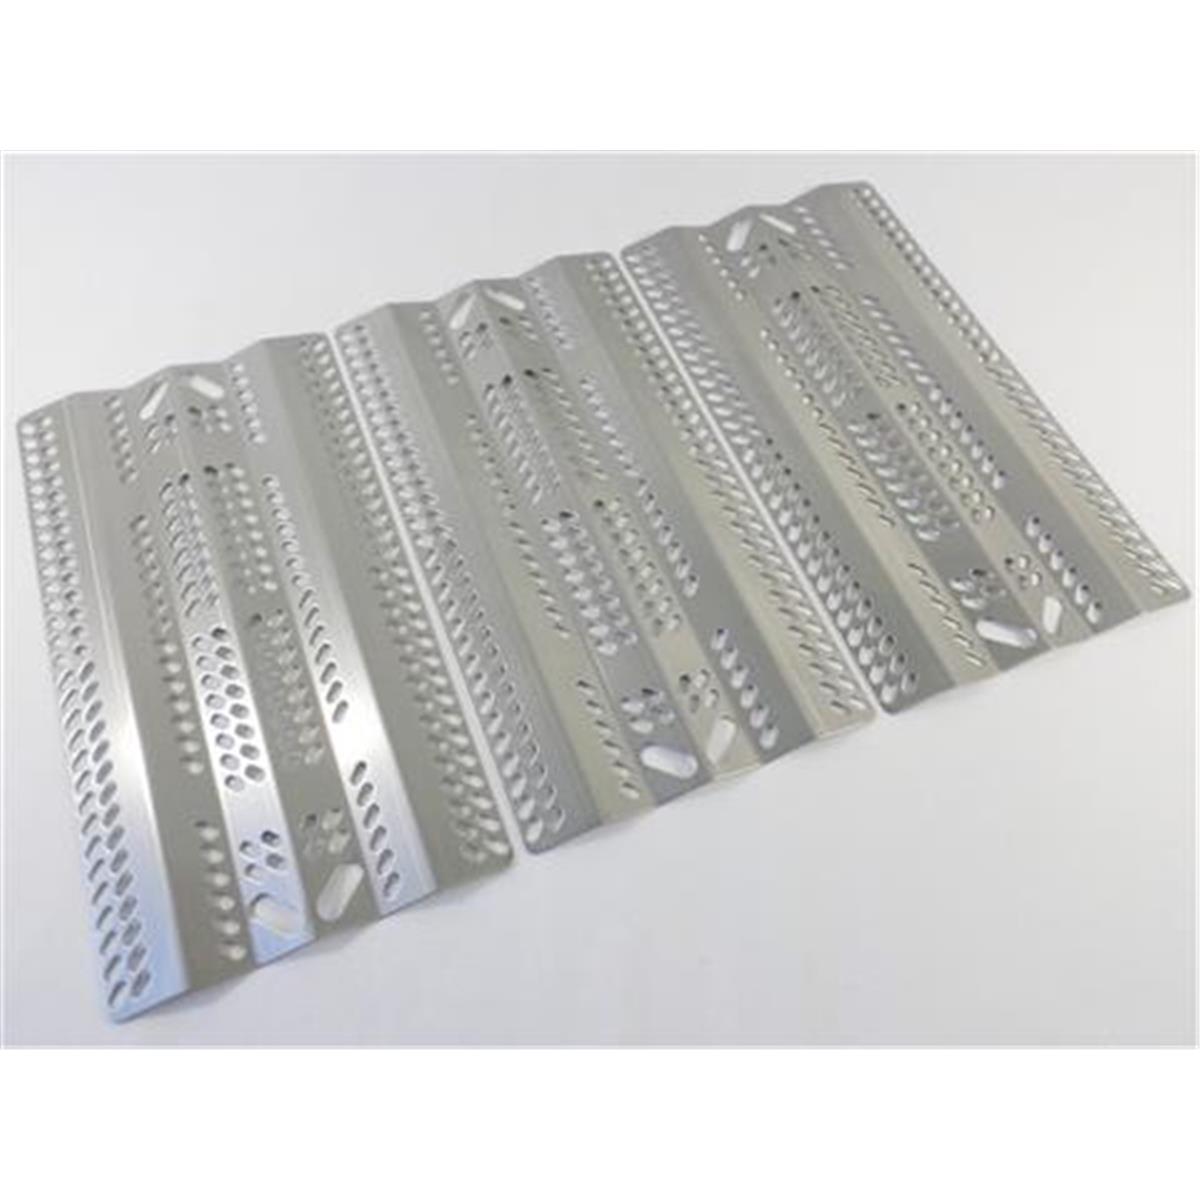 30-b-05-3 Replacement Vaporizing Panels For Grills